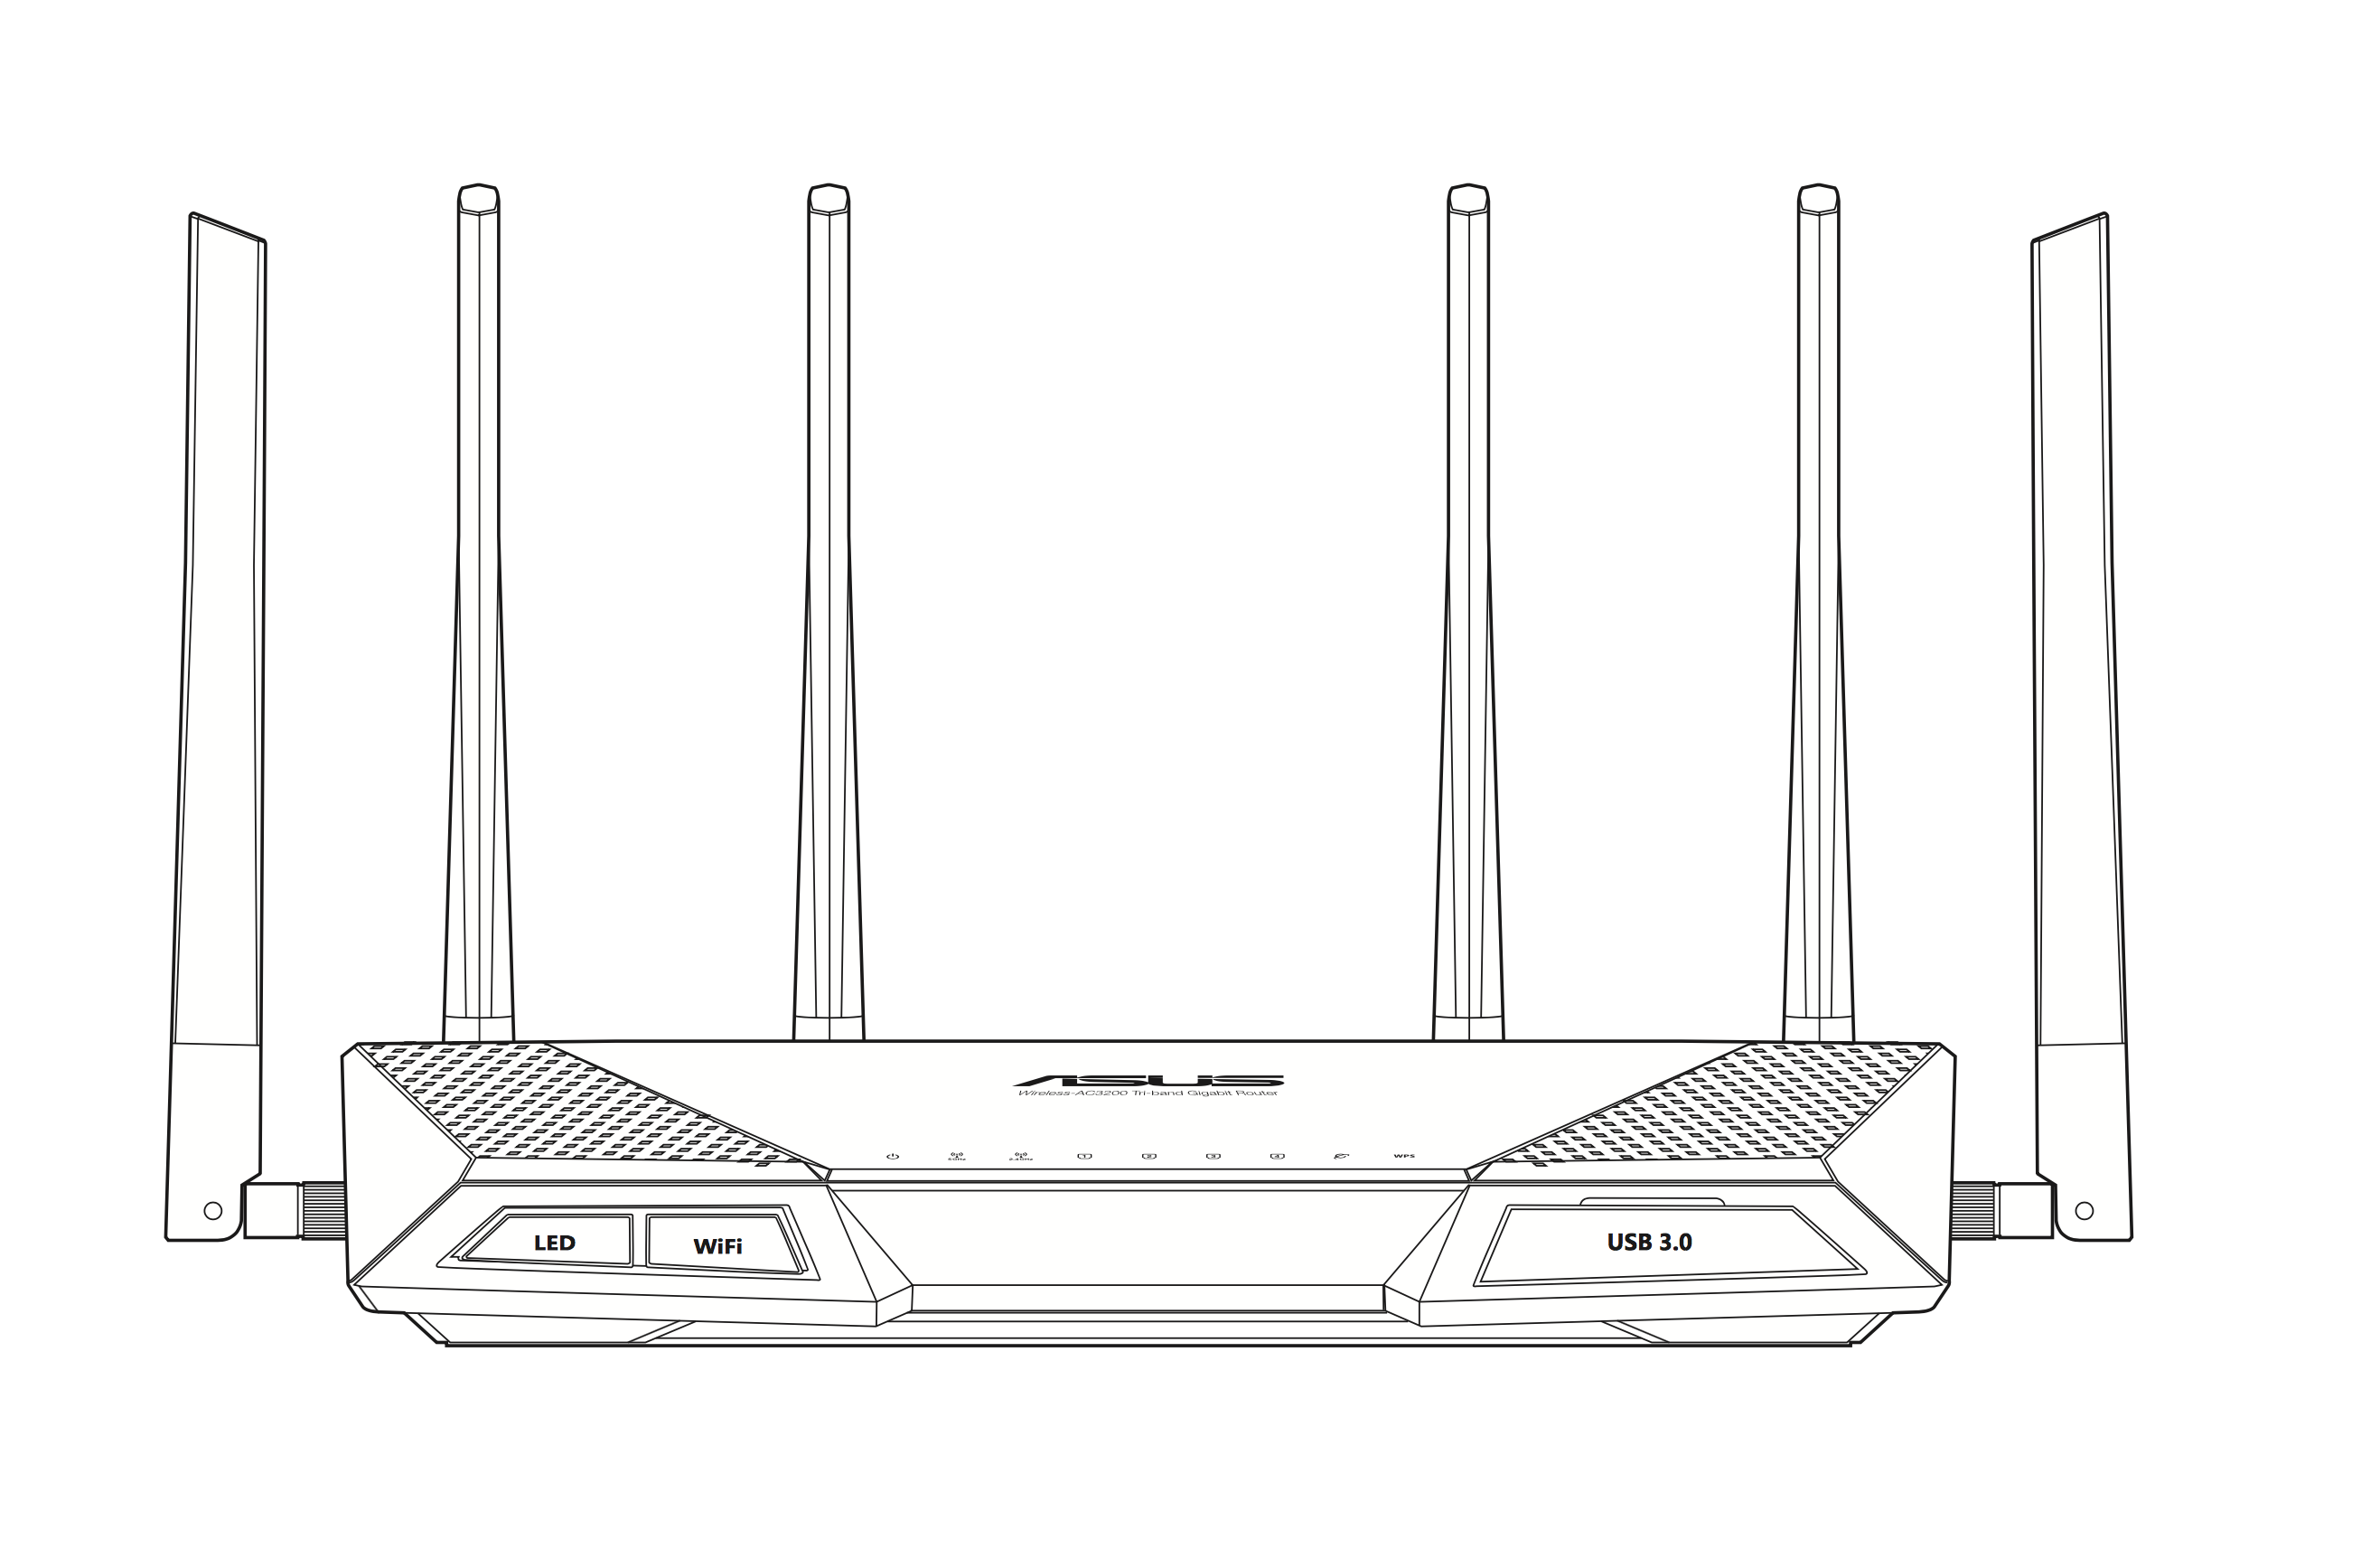 ASUS RT-AC3200 Wireless-AC 3200 Tri-Band Gigabit Router